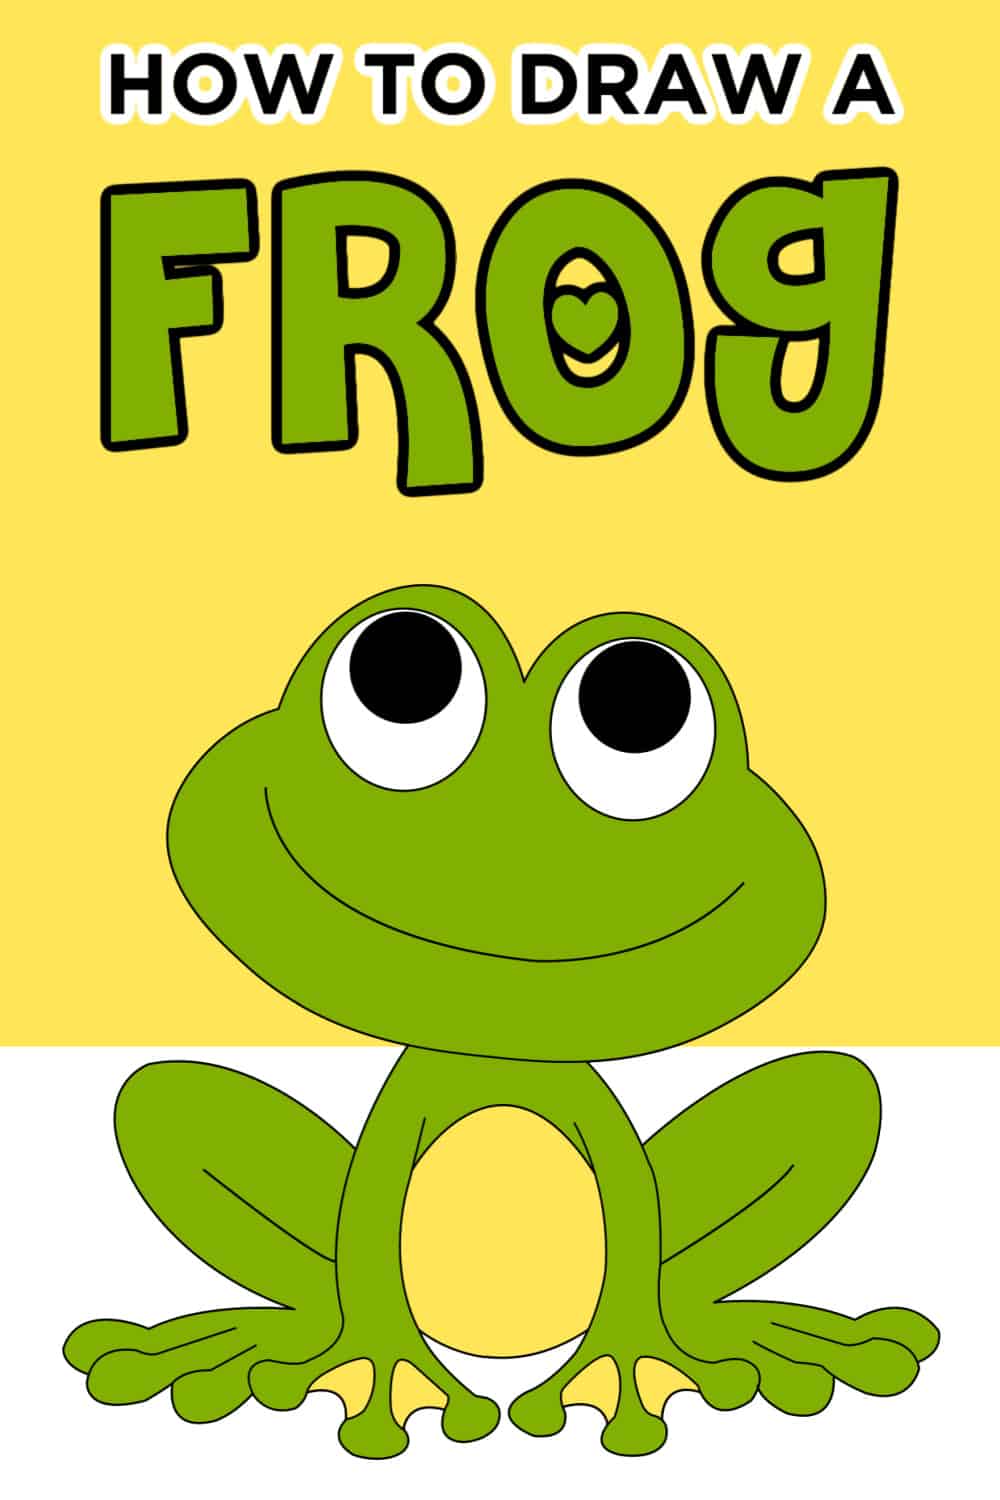 How To Draw Cartoons: Frog | Frog drawing, Easy drawings, Rock painting  ideas easy